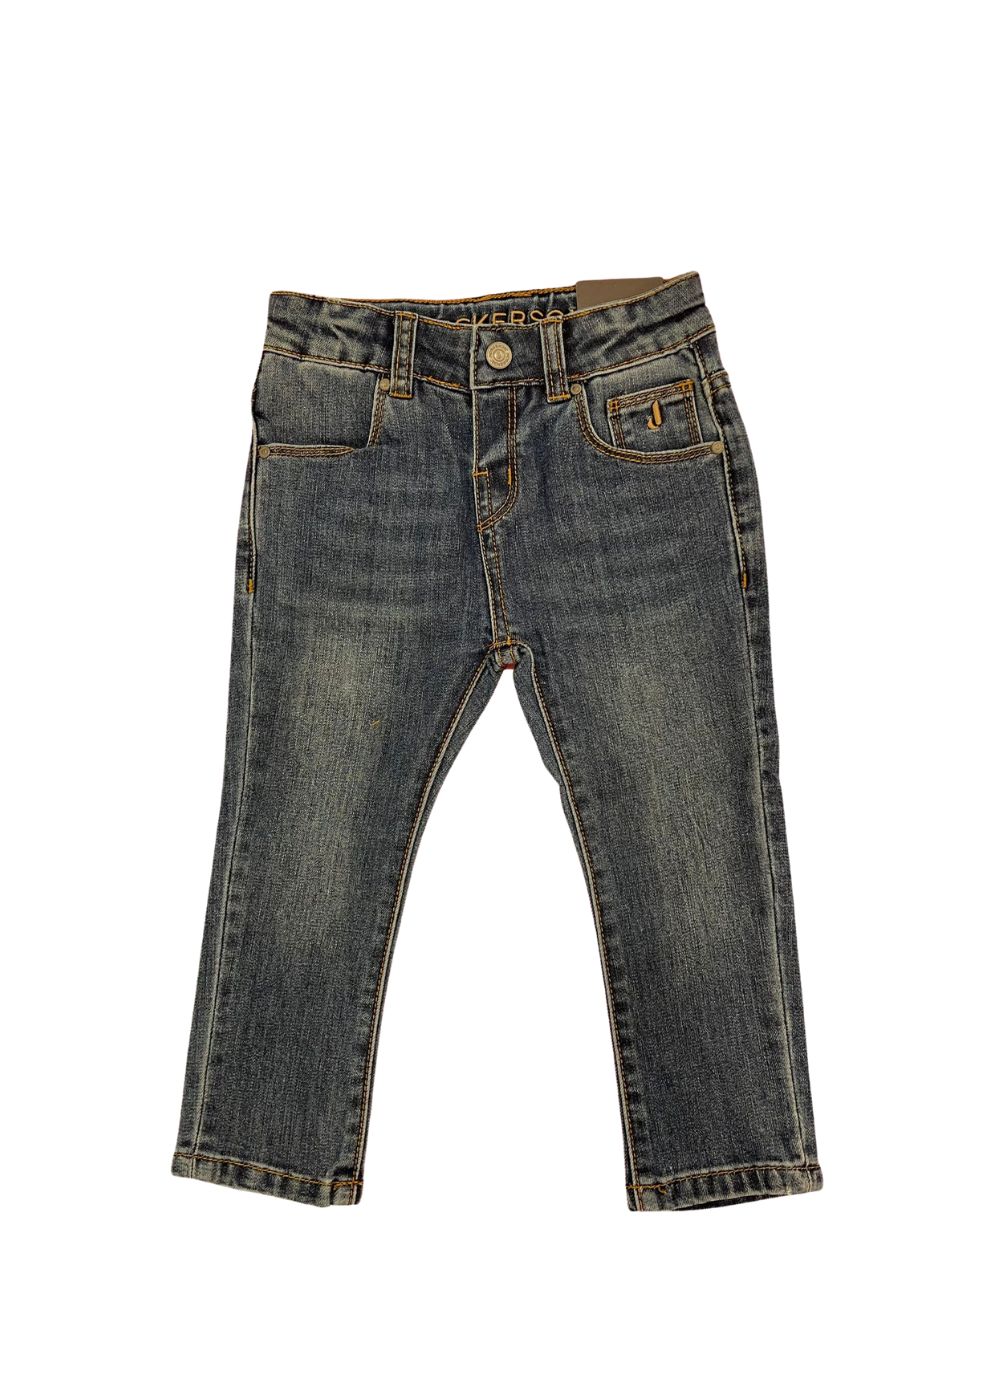 Featured image for “Jeckerson Jeans In Denim”